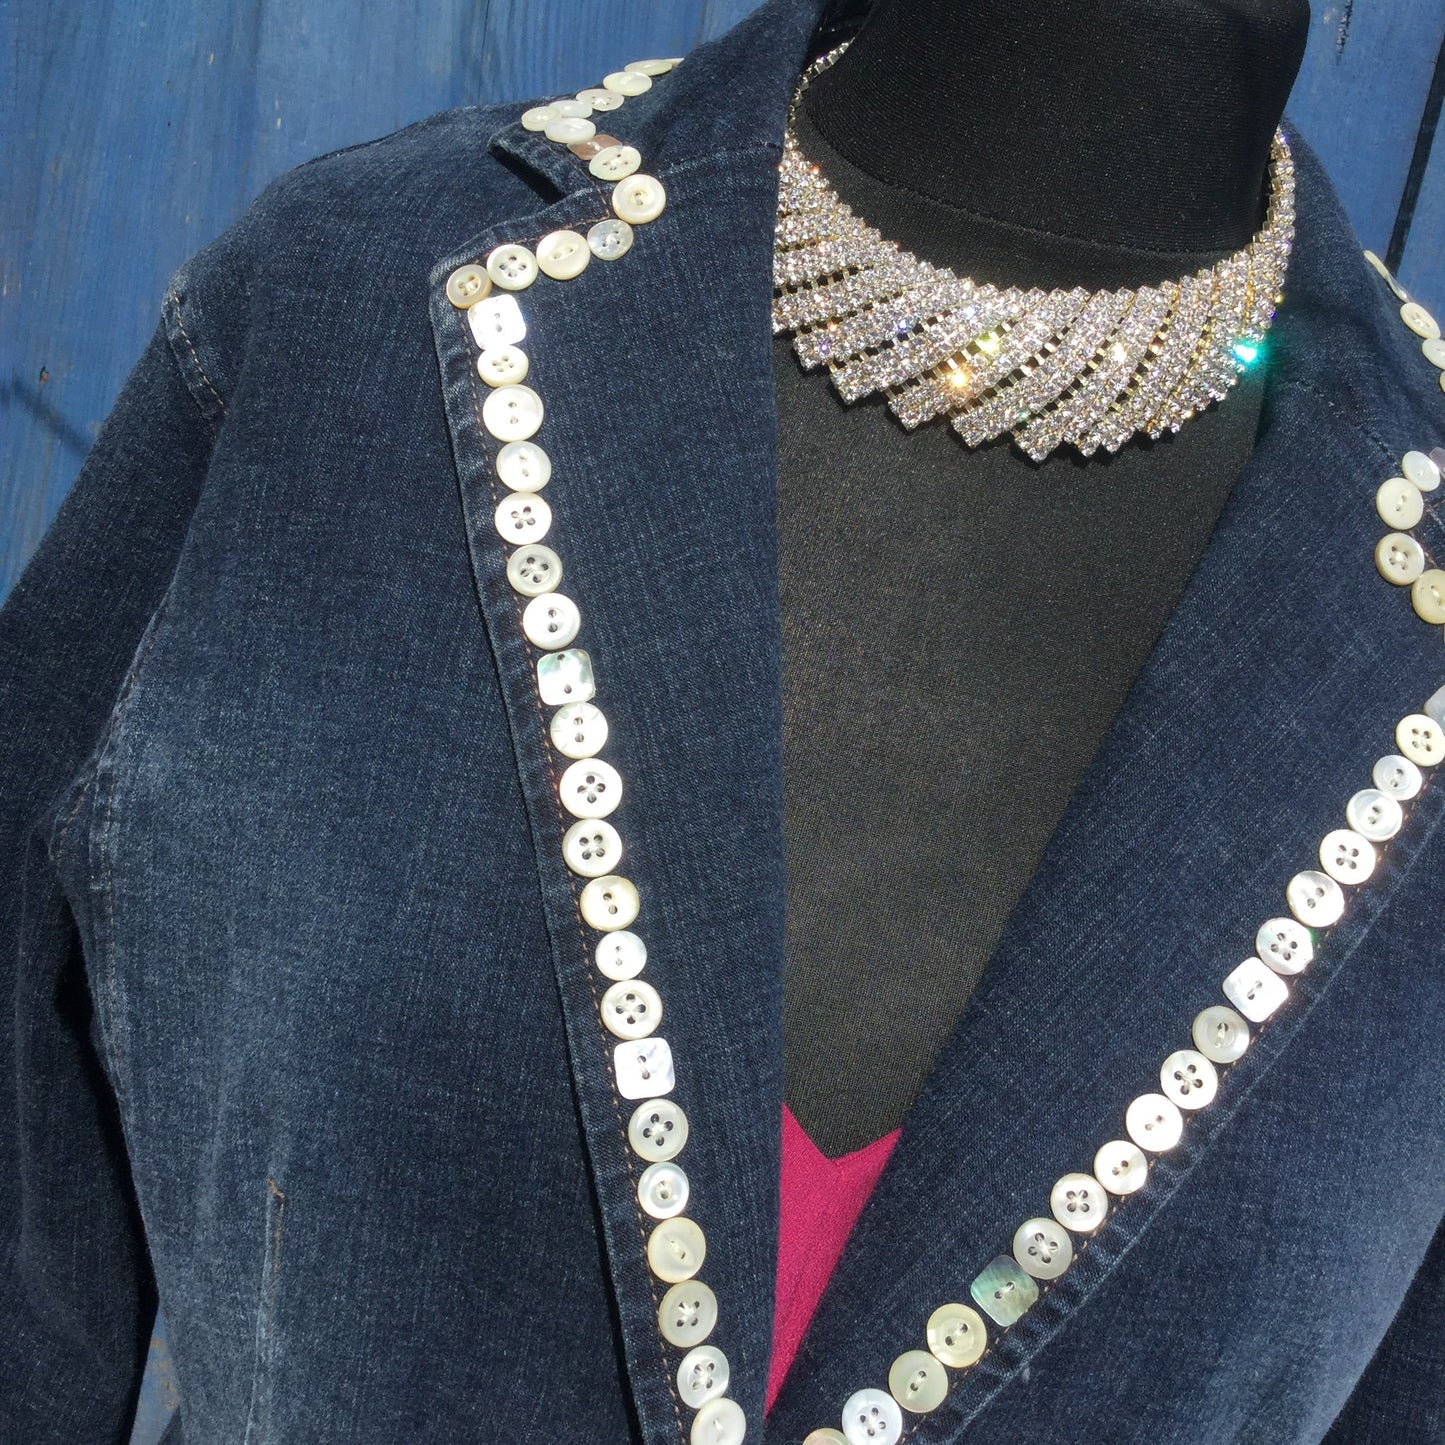 Up-cycled pearly queen denim jacket